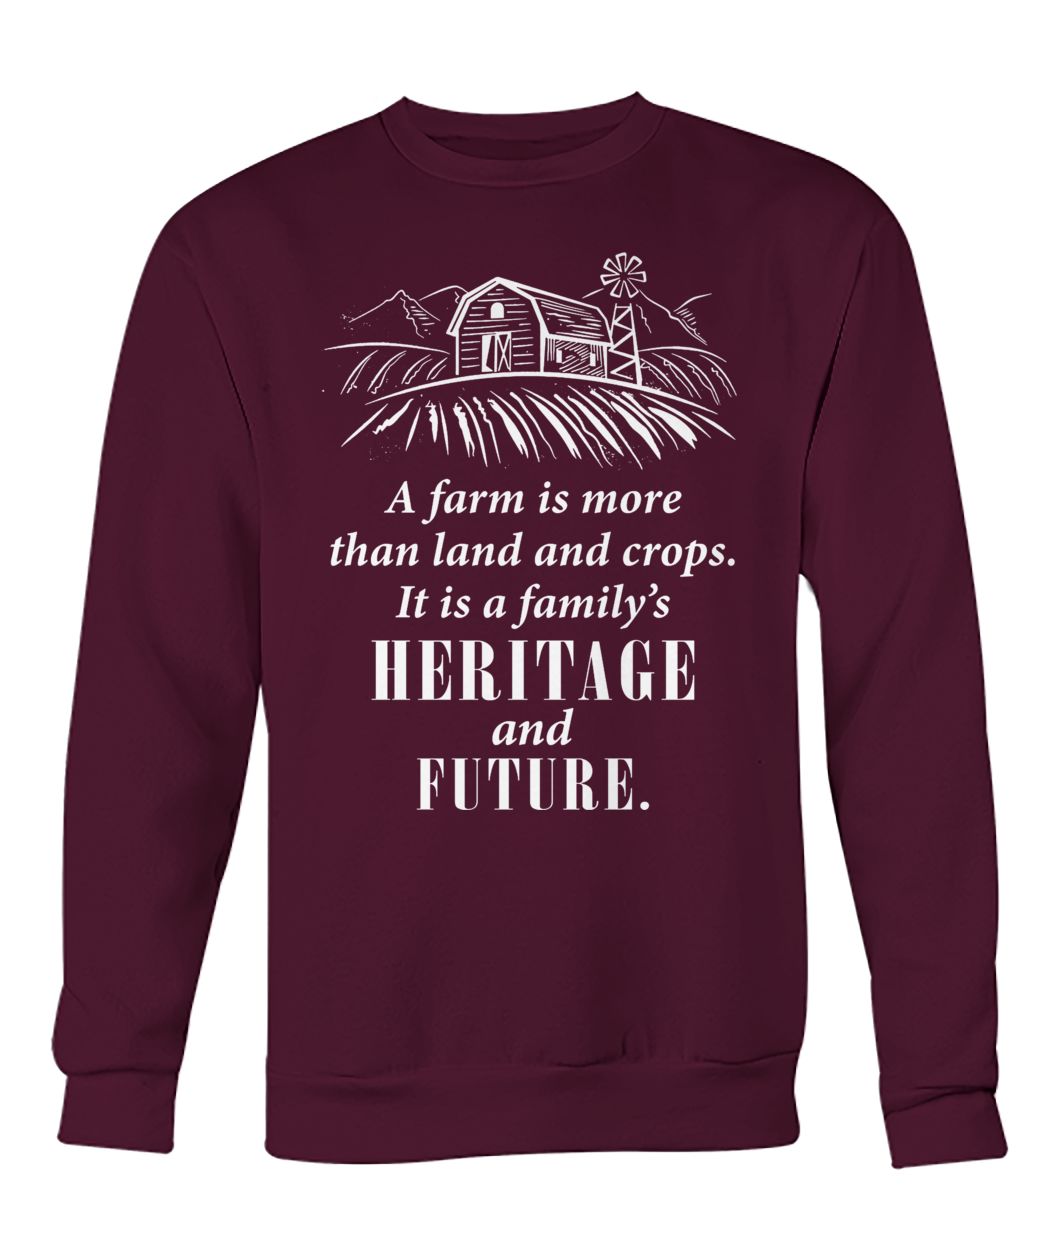 A farm is more than land and crops it is a family's heritage and future crew neck sweatshirt